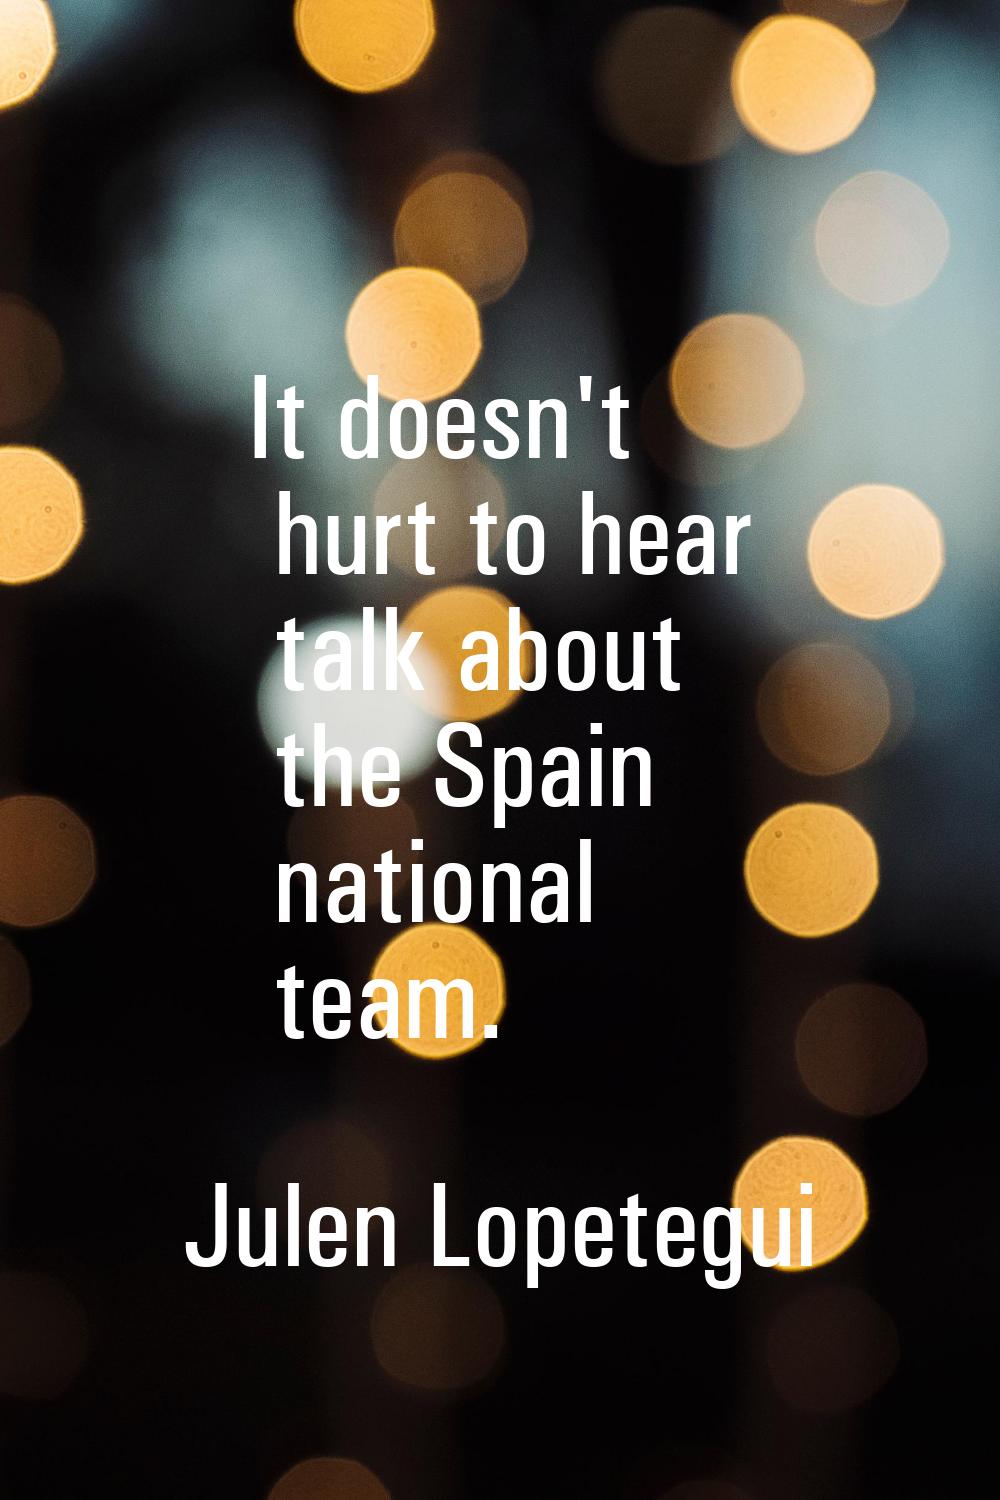 It doesn't hurt to hear talk about the Spain national team.